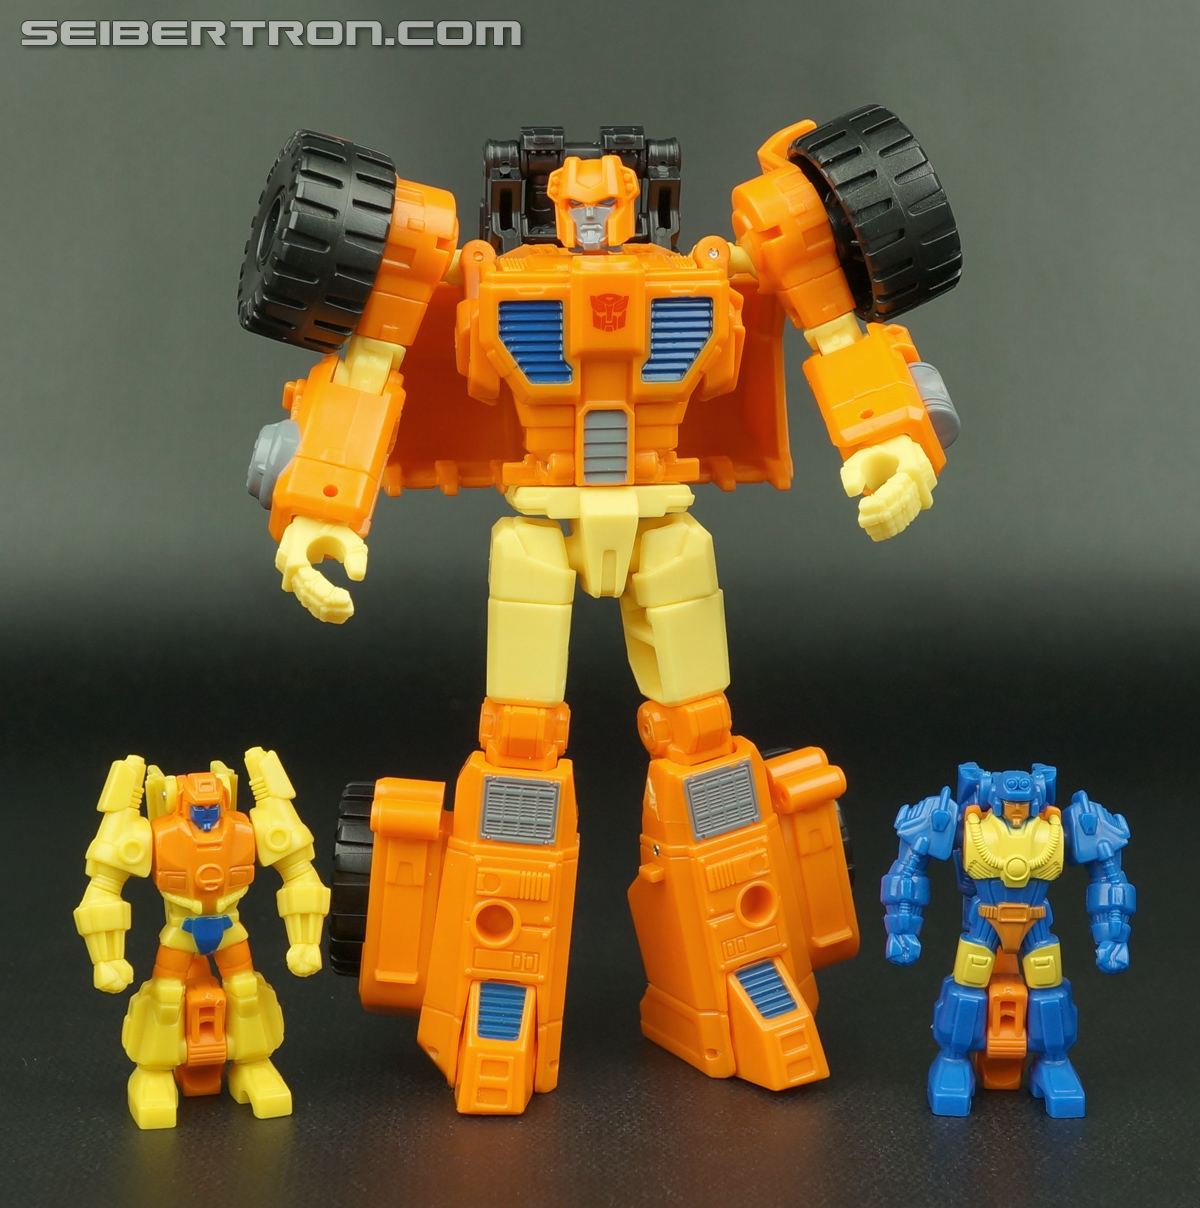 Transformers Generations Caliburst (Tracer) (Image #61 of 63)